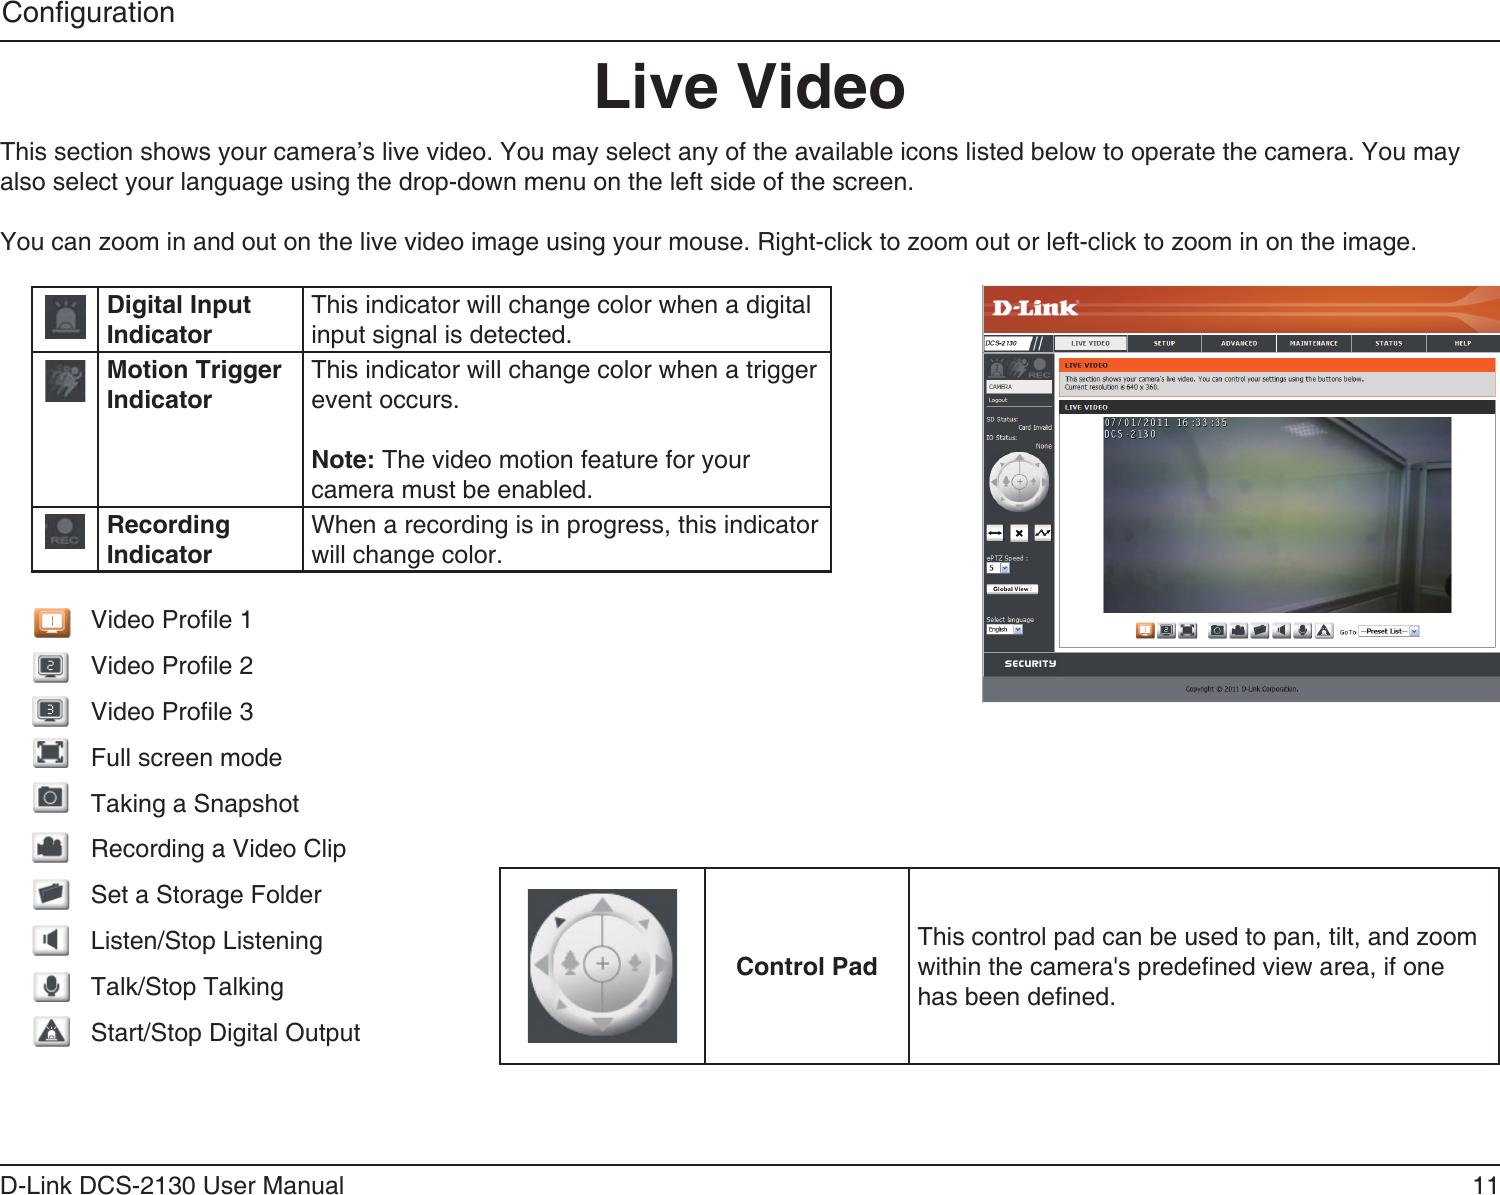 11D-Link DCS-2130 User ManualCongurationLive VideoThis section shows your camera’s live video. You may select any of the available icons listed below to operate the camera. You may also select your language using the drop-down menu on the left side of the screen.You can zoom in and out on the live video image using your mouse. Right-click to zoom out or left-click to zoom in on the image.Digital Input IndicatorThis indicator will change color when a digital input signal is detected.Motion Trigger IndicatorThis indicator will change color when a trigger event occurs.Note: The video motion feature for your camera must be enabled.Recording IndicatorWhen a recording is in progress, this indicator will change color.Video Prole 1Video Prole 2Video Prole 3Full screen modeTaking a SnapshotRecording a Video ClipSet a Storage FolderListen/Stop ListeningTalk/Stop TalkingStart/Stop Digital OutputControl PadThis control pad can be used to pan, tilt, and zoom within the camera&apos;s predened view area, if one has been dened.